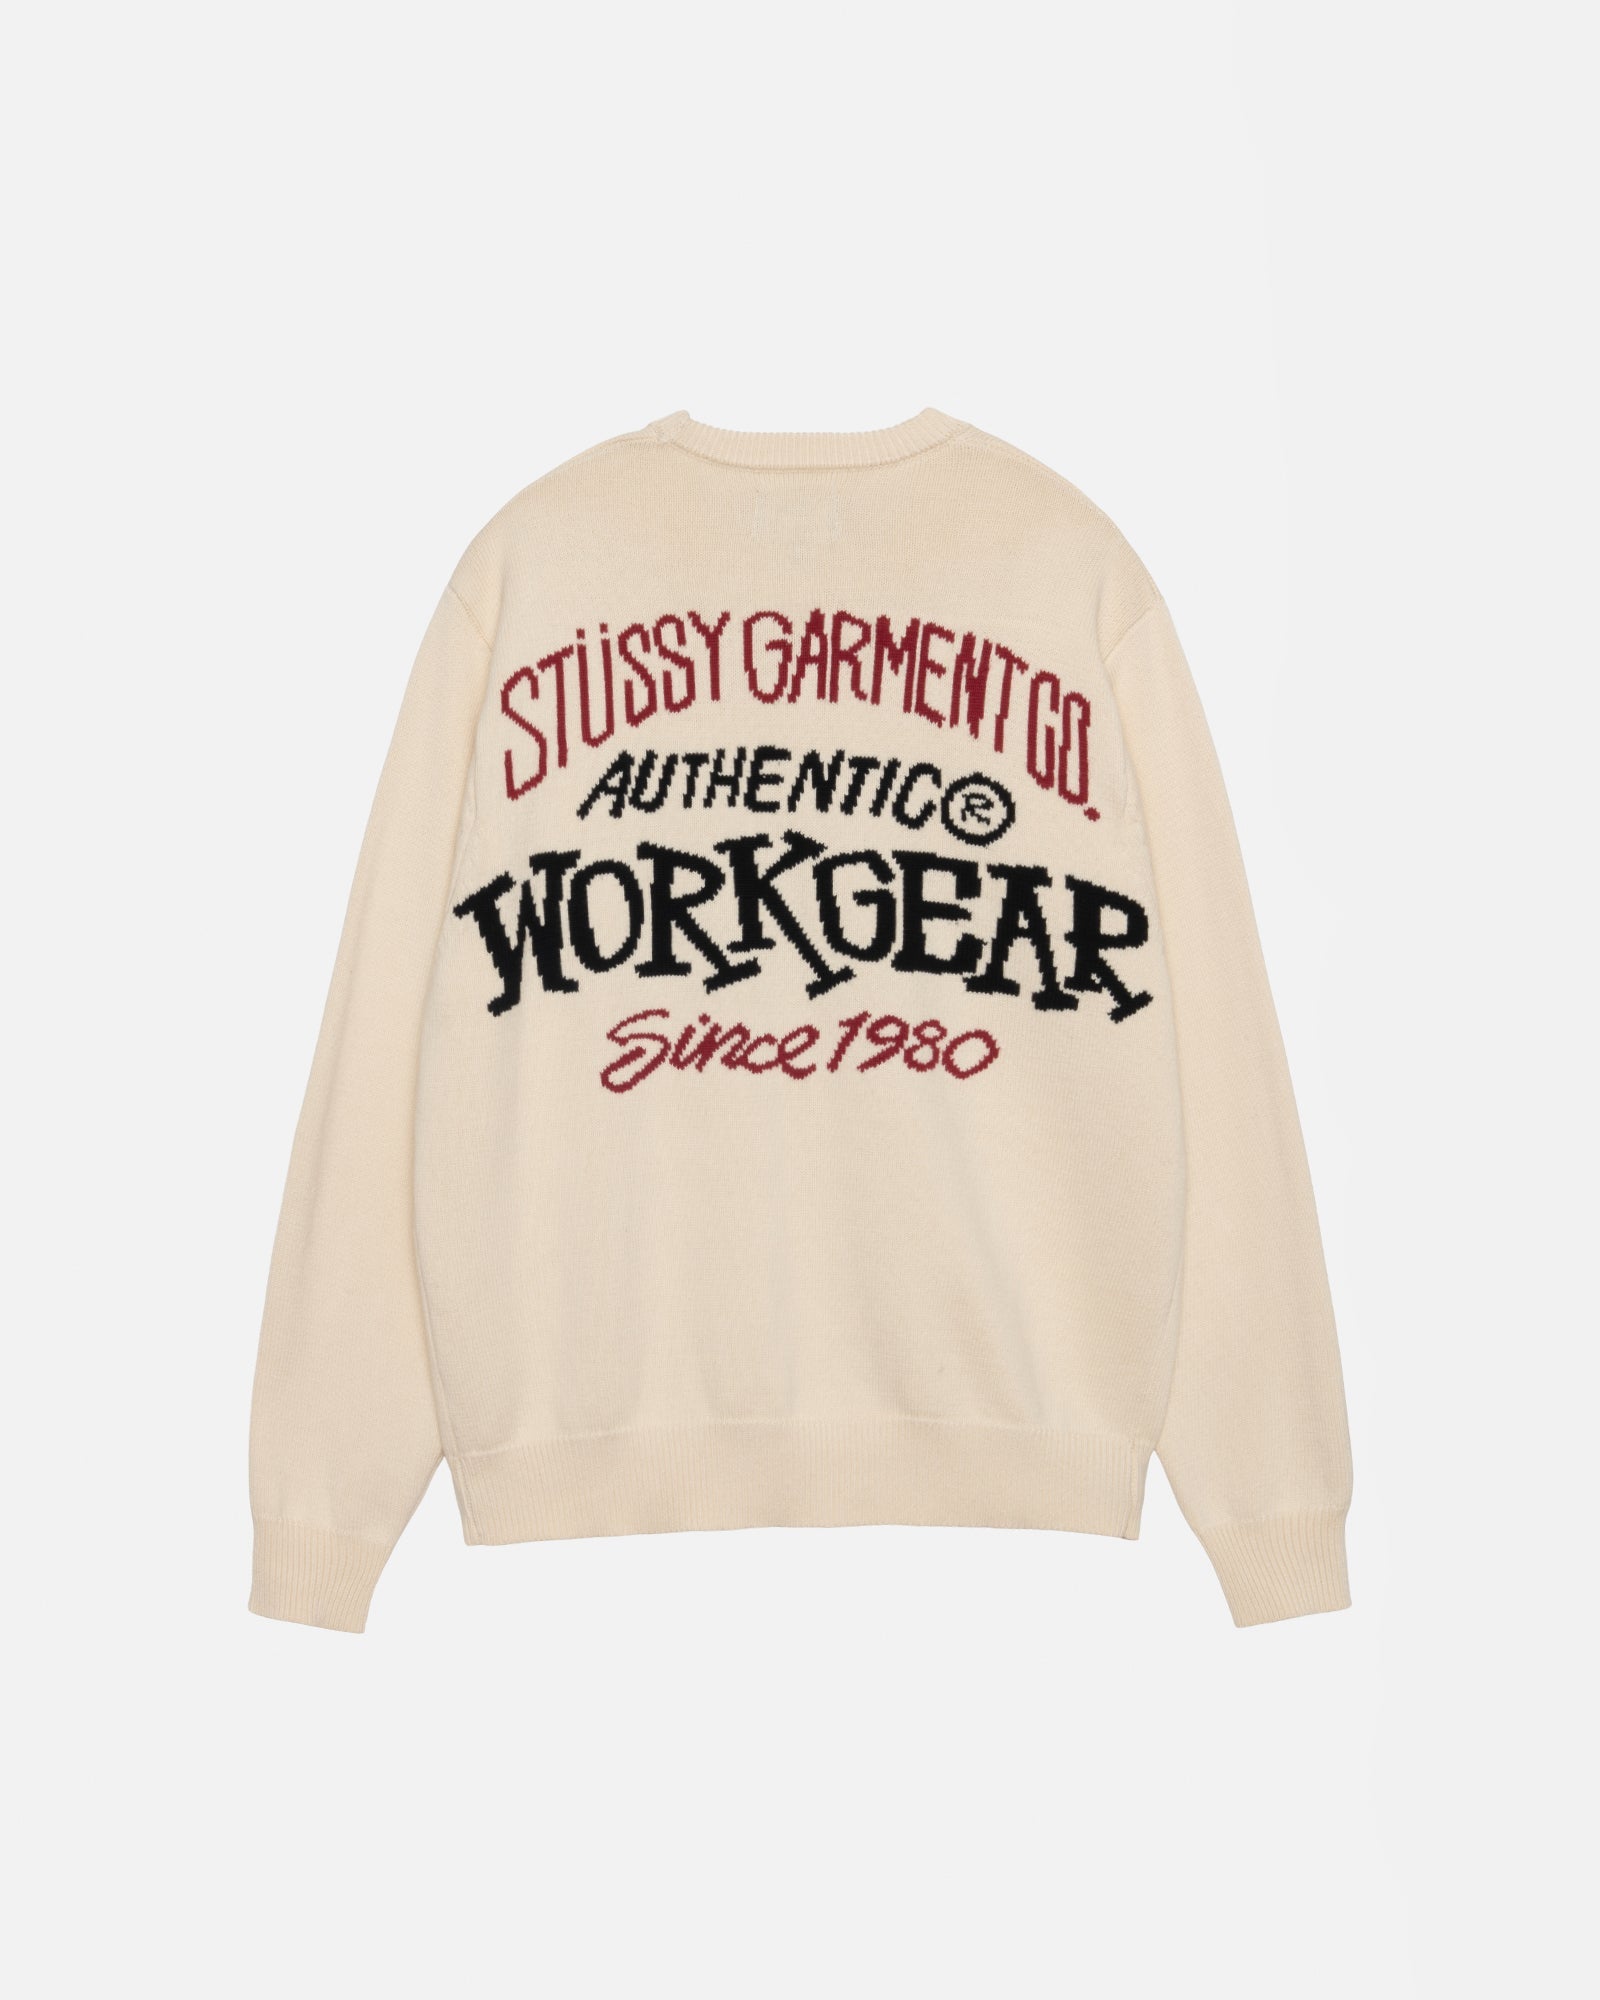 AUTHENTIC WORKGEAR SWEATER